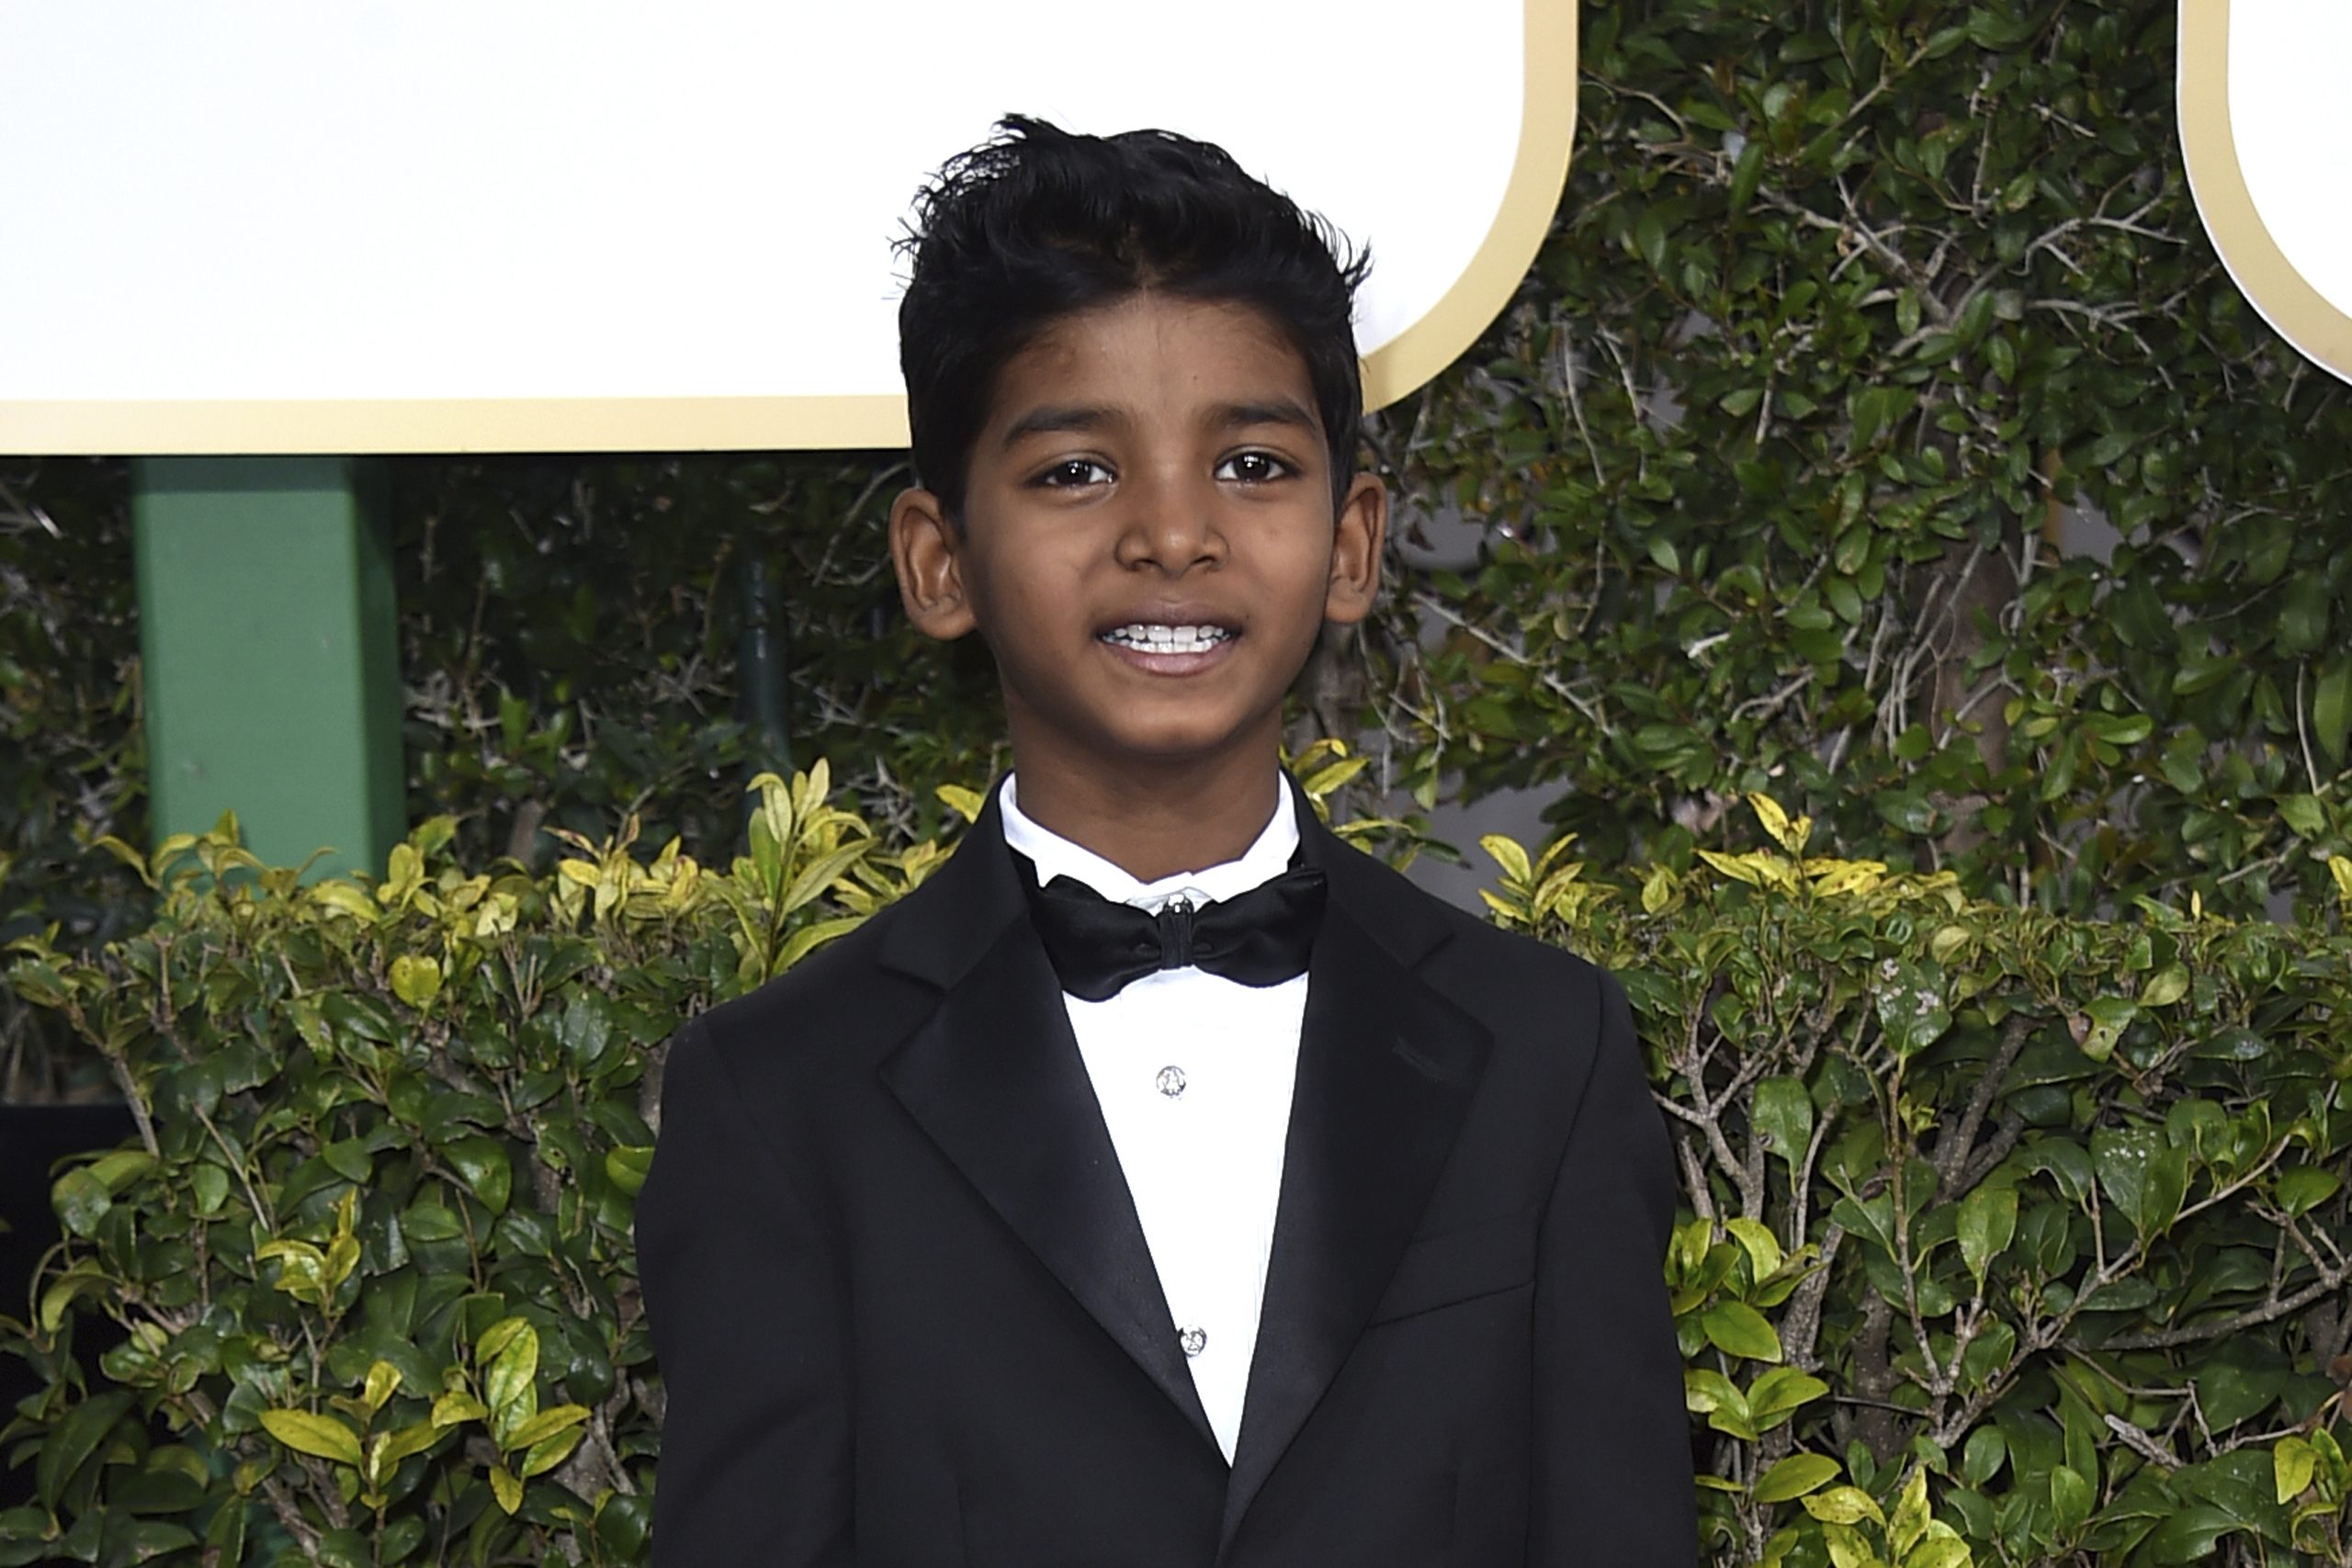 Sunny Pawar arrives at the 74th annual Golden Globe Awards at the Beverly Hilton Hotel in Beverly Hills, Calif., on Jan. 8, 2017. (Jordan Strauss—Invision/AP)